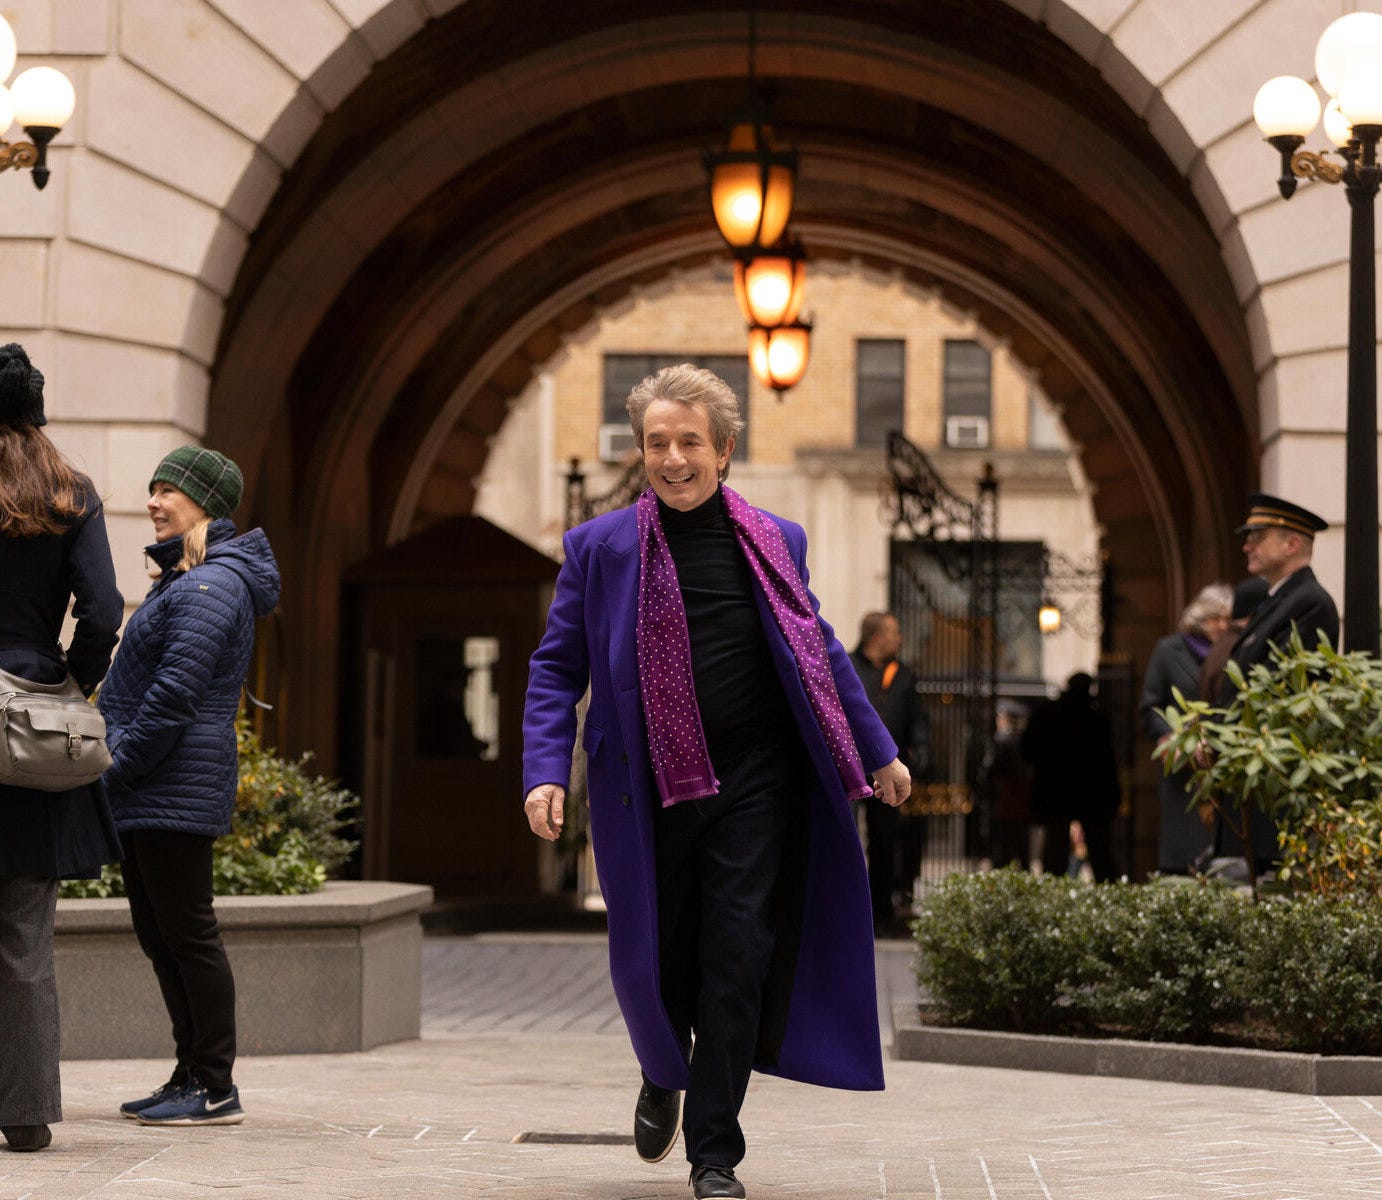 Martin Short framed in an archway wearing a purple coat and purple scarf.